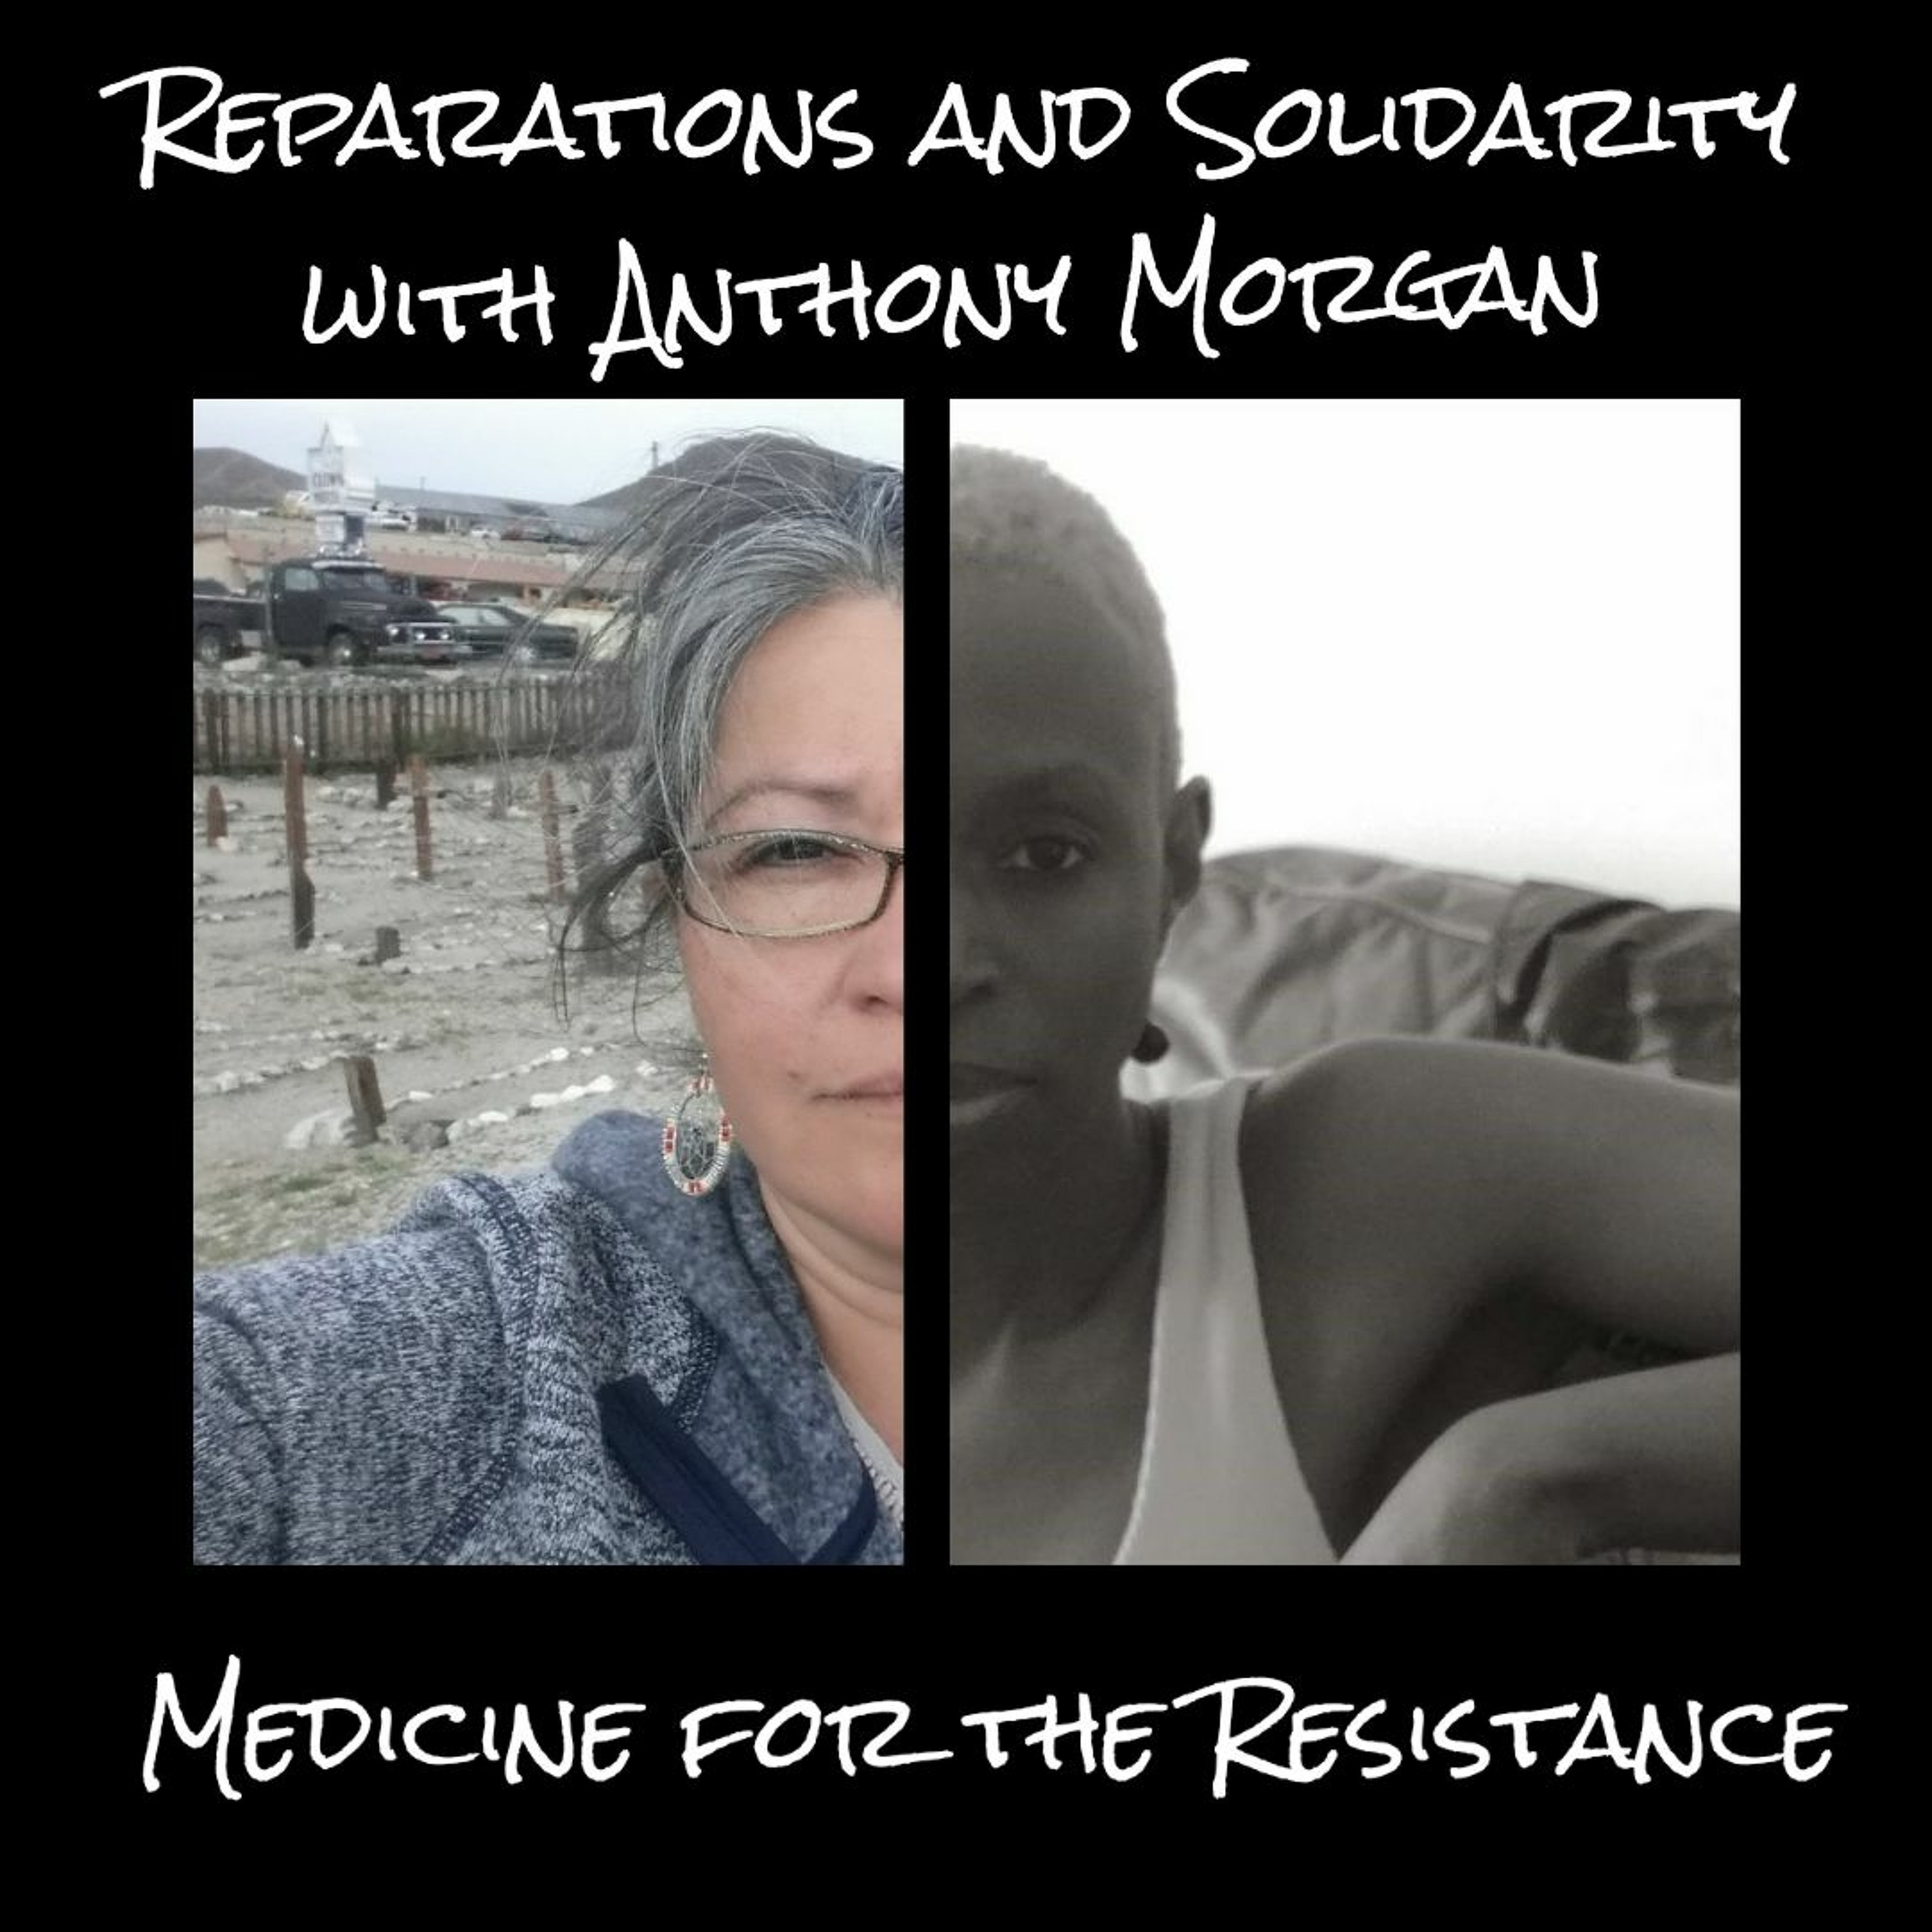 Reparations and solidarity with Human Rights Lawyer Anthony Morgan